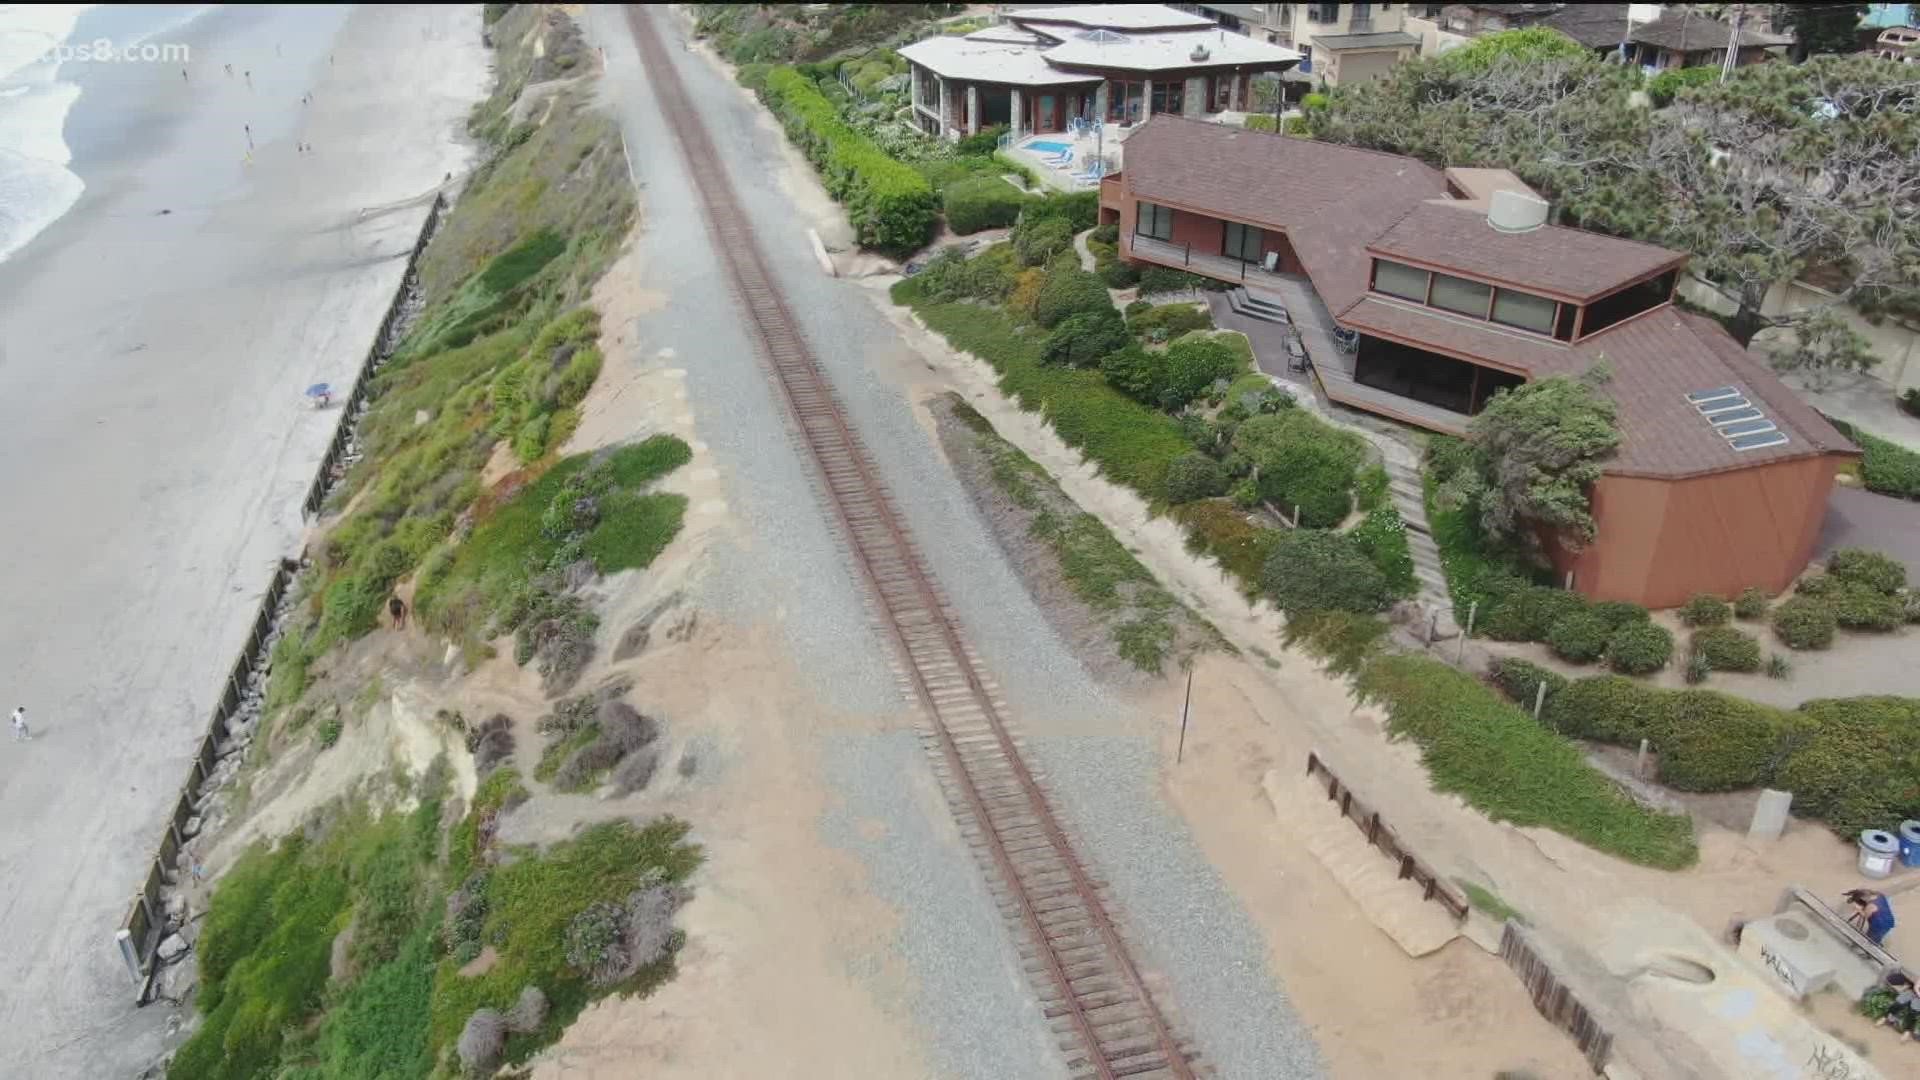 Plans to build a fence along the Del Mar bluffs are moving forward, and some people are sounding off in opposition saying it will impact beach access.